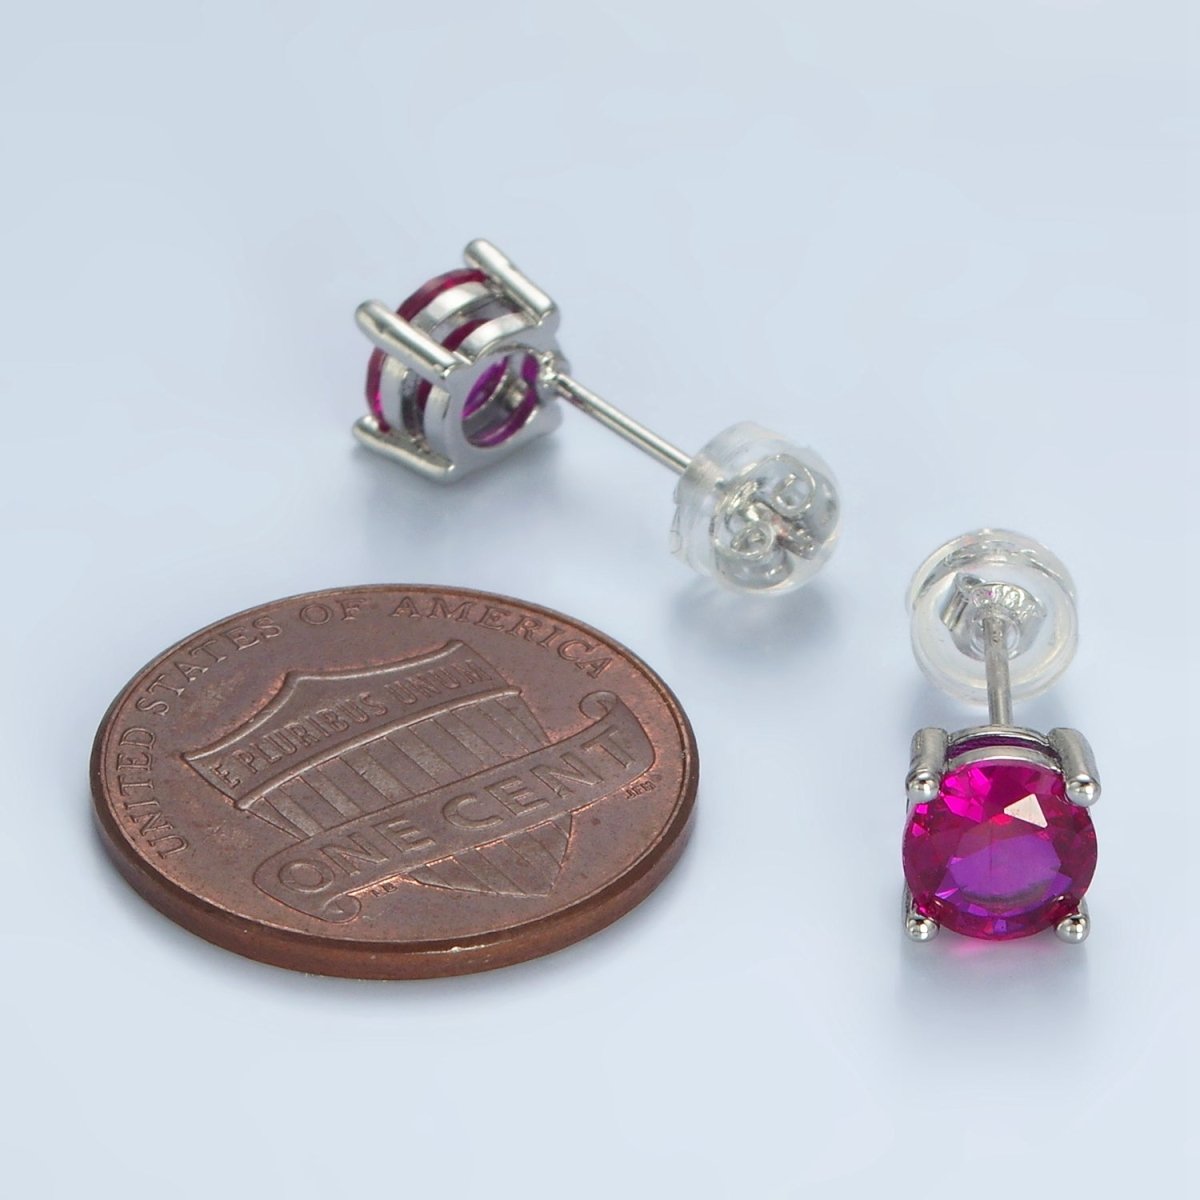 White Gold Filled 6mm Round Birthstone CZ Stud Earrings | AB1214 - AB1221 - DLUXCA